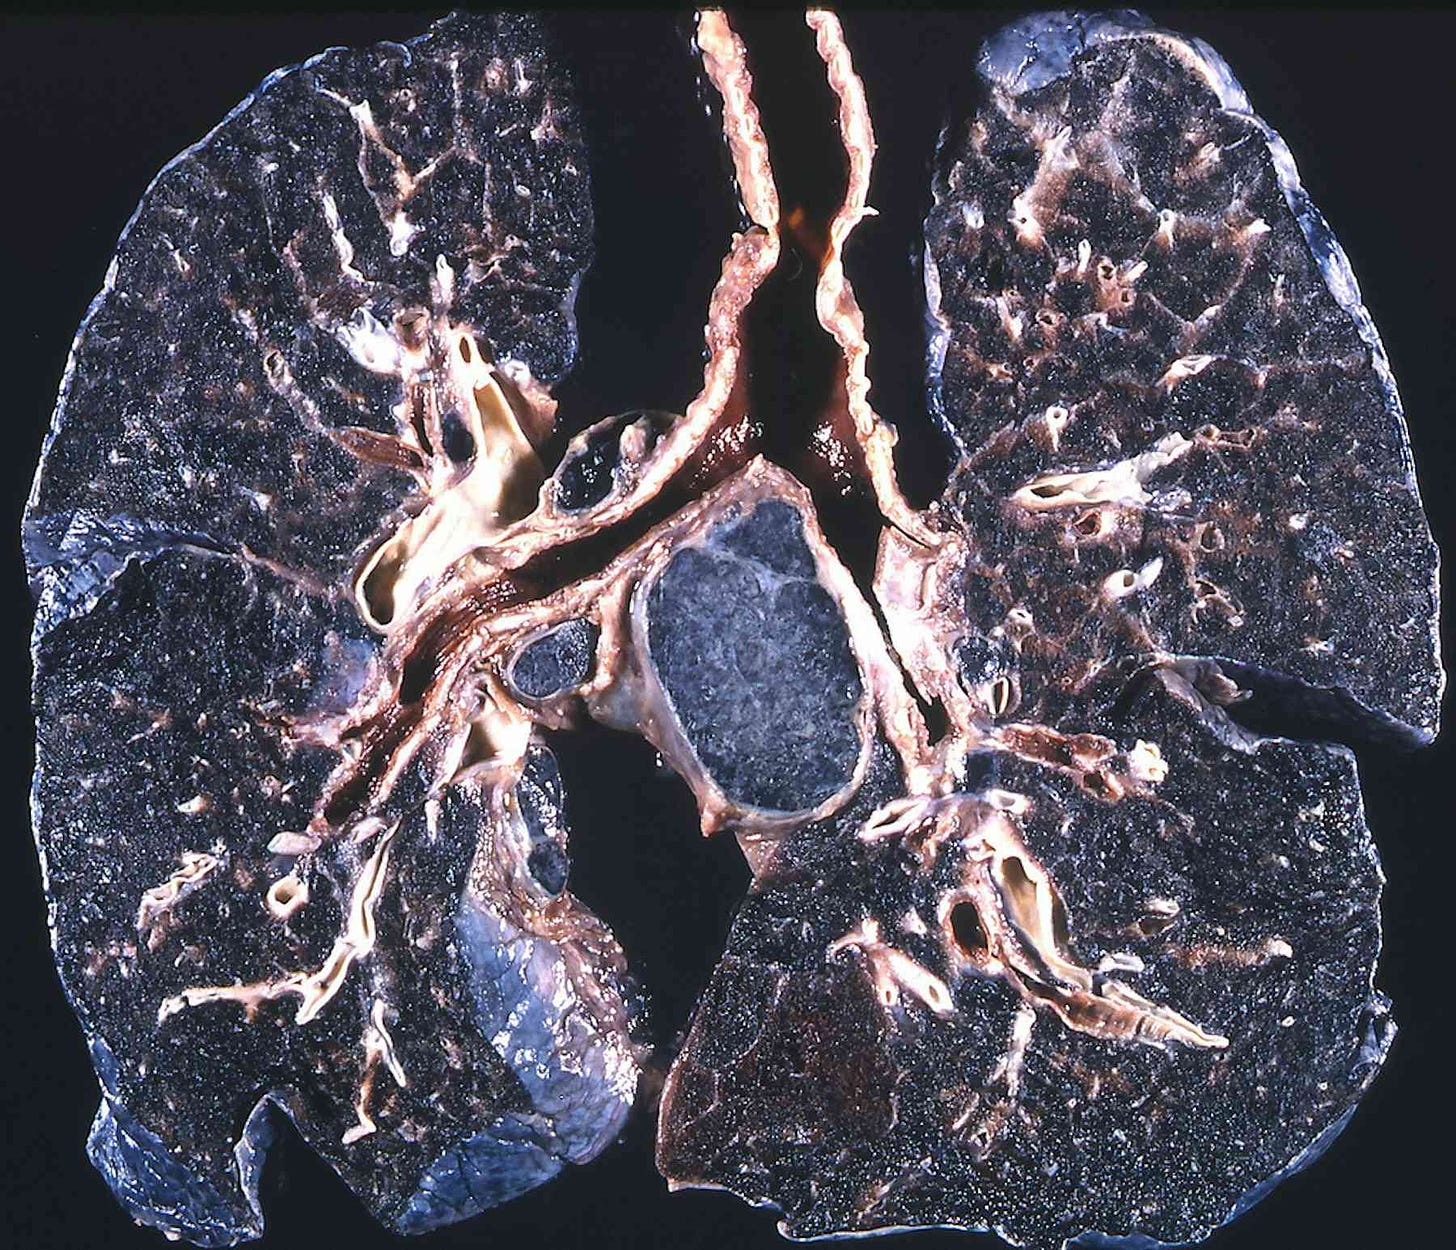 Black lung disease on the rise: 5 questions answered